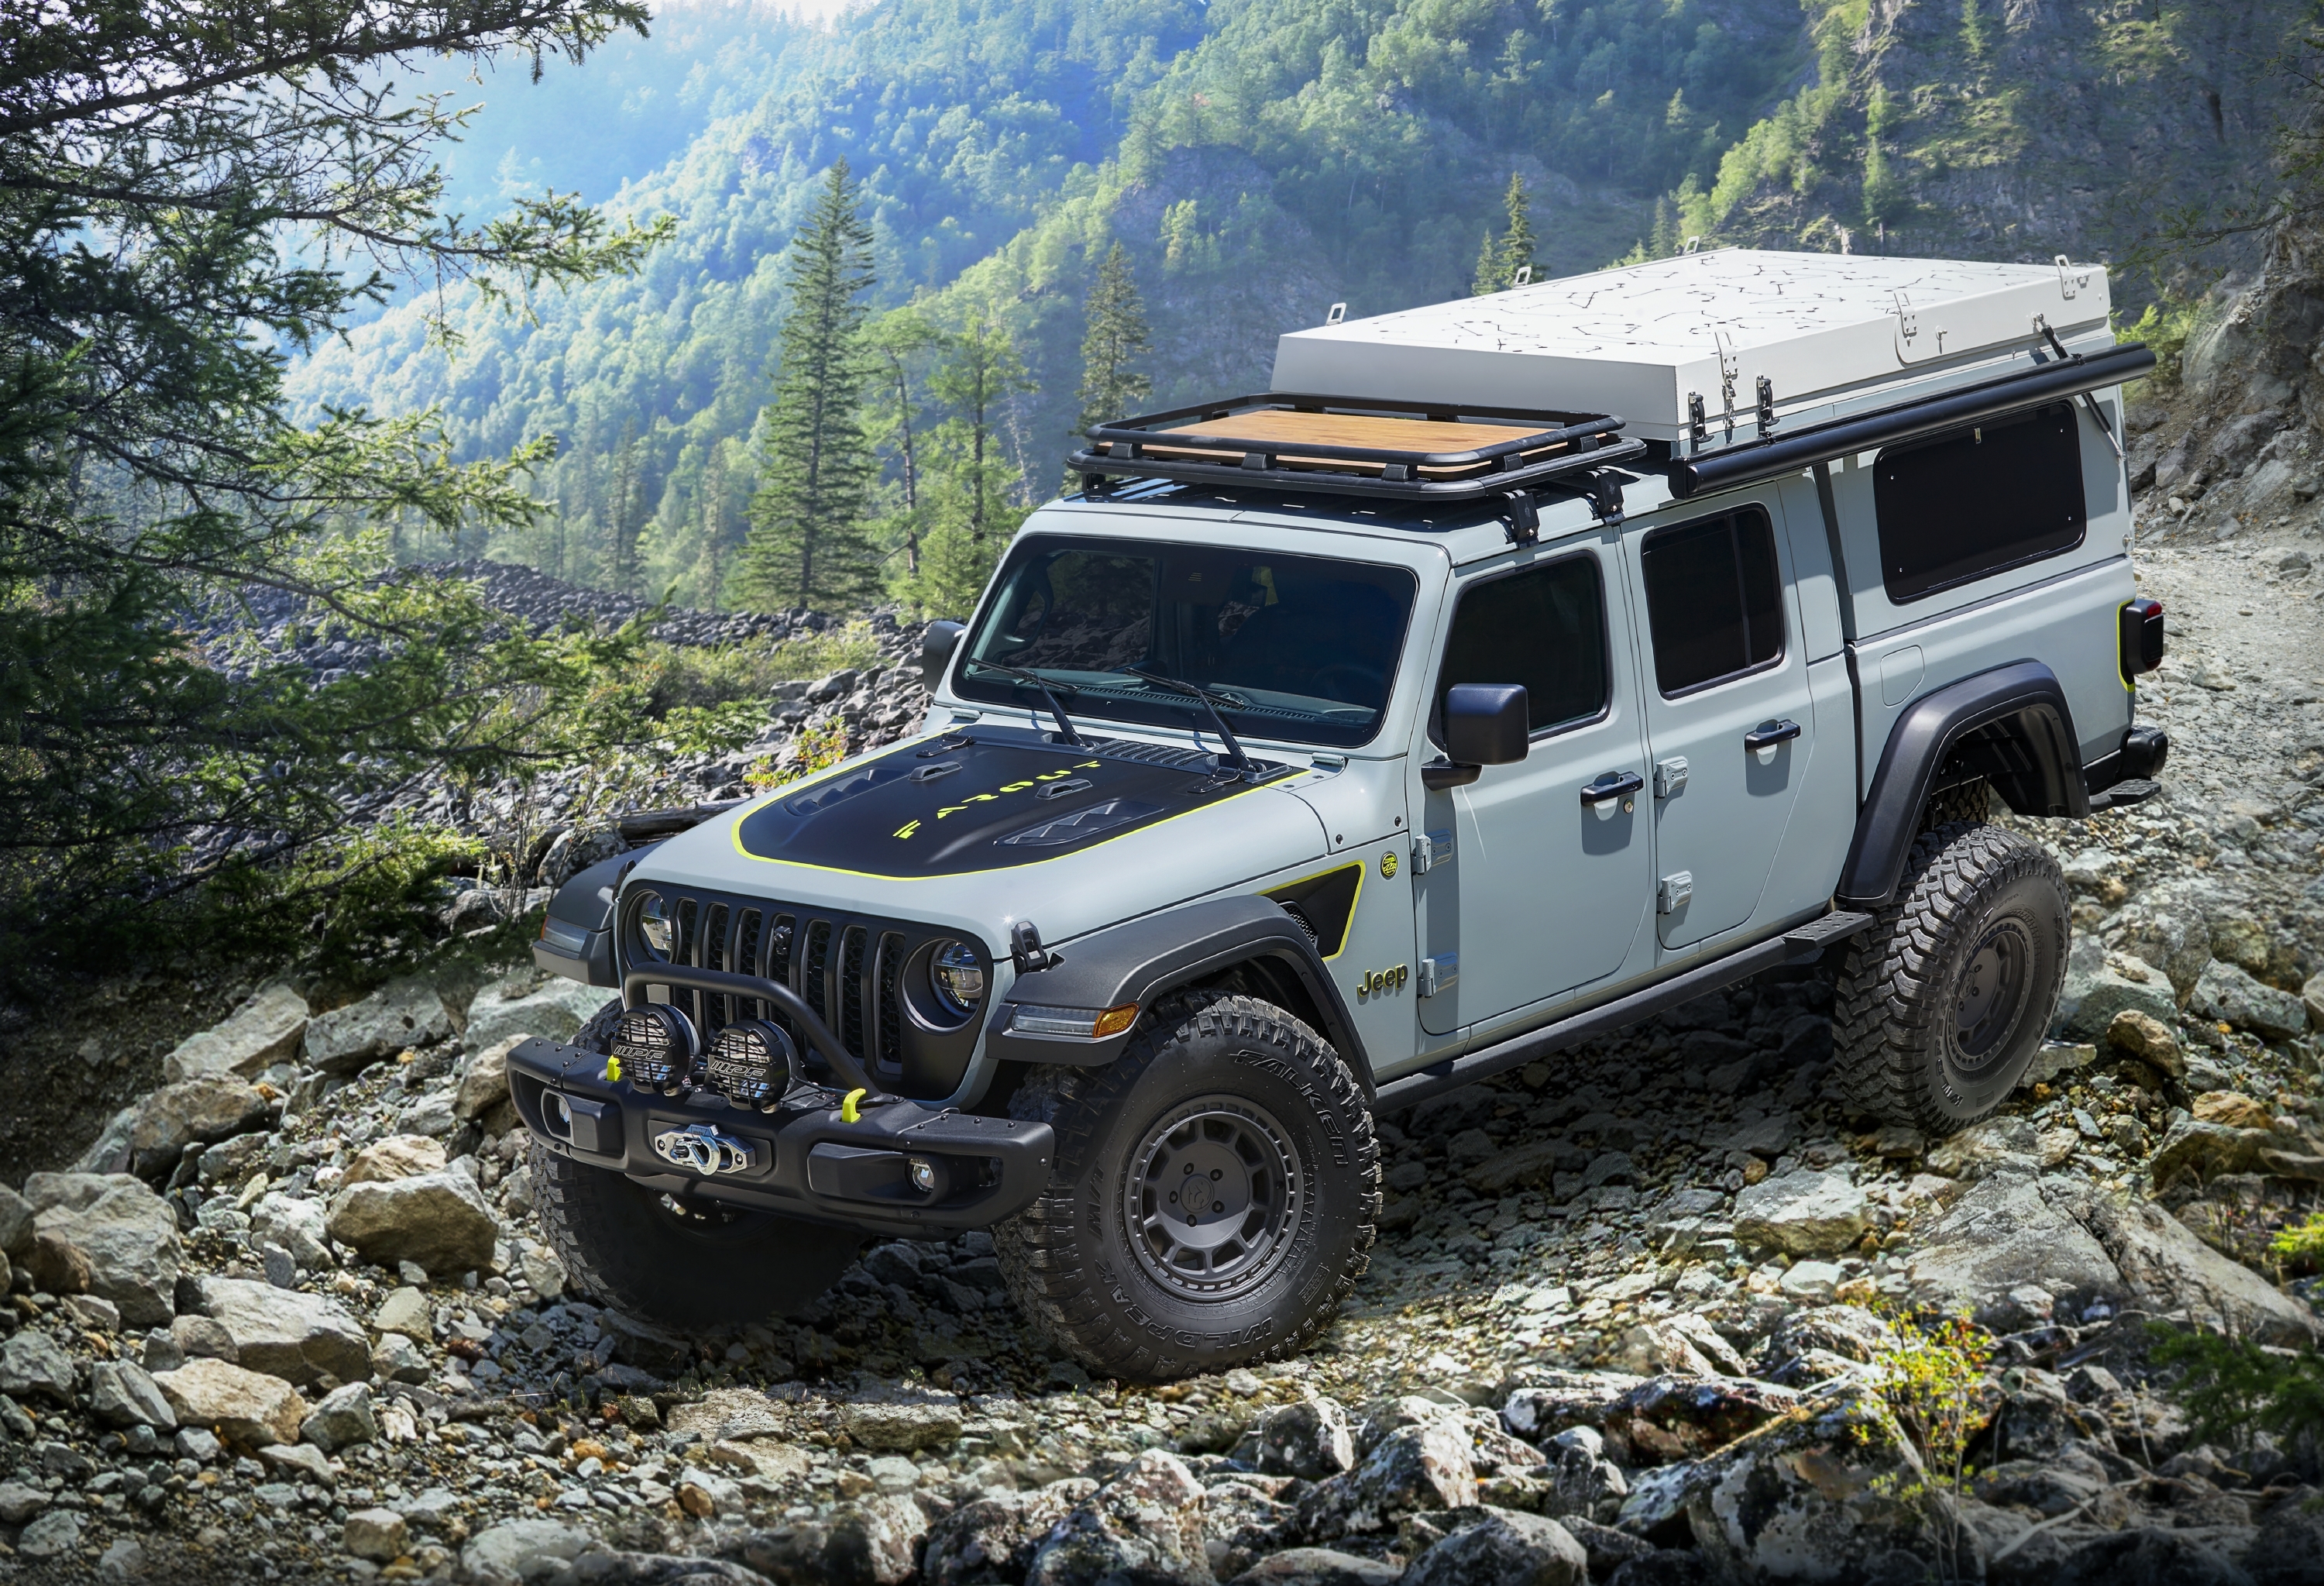 HD wallpaper, Rugged, Off Roading, Tough, Four Wheel Drive, 2020, Jeep Gladiator Farout Concept